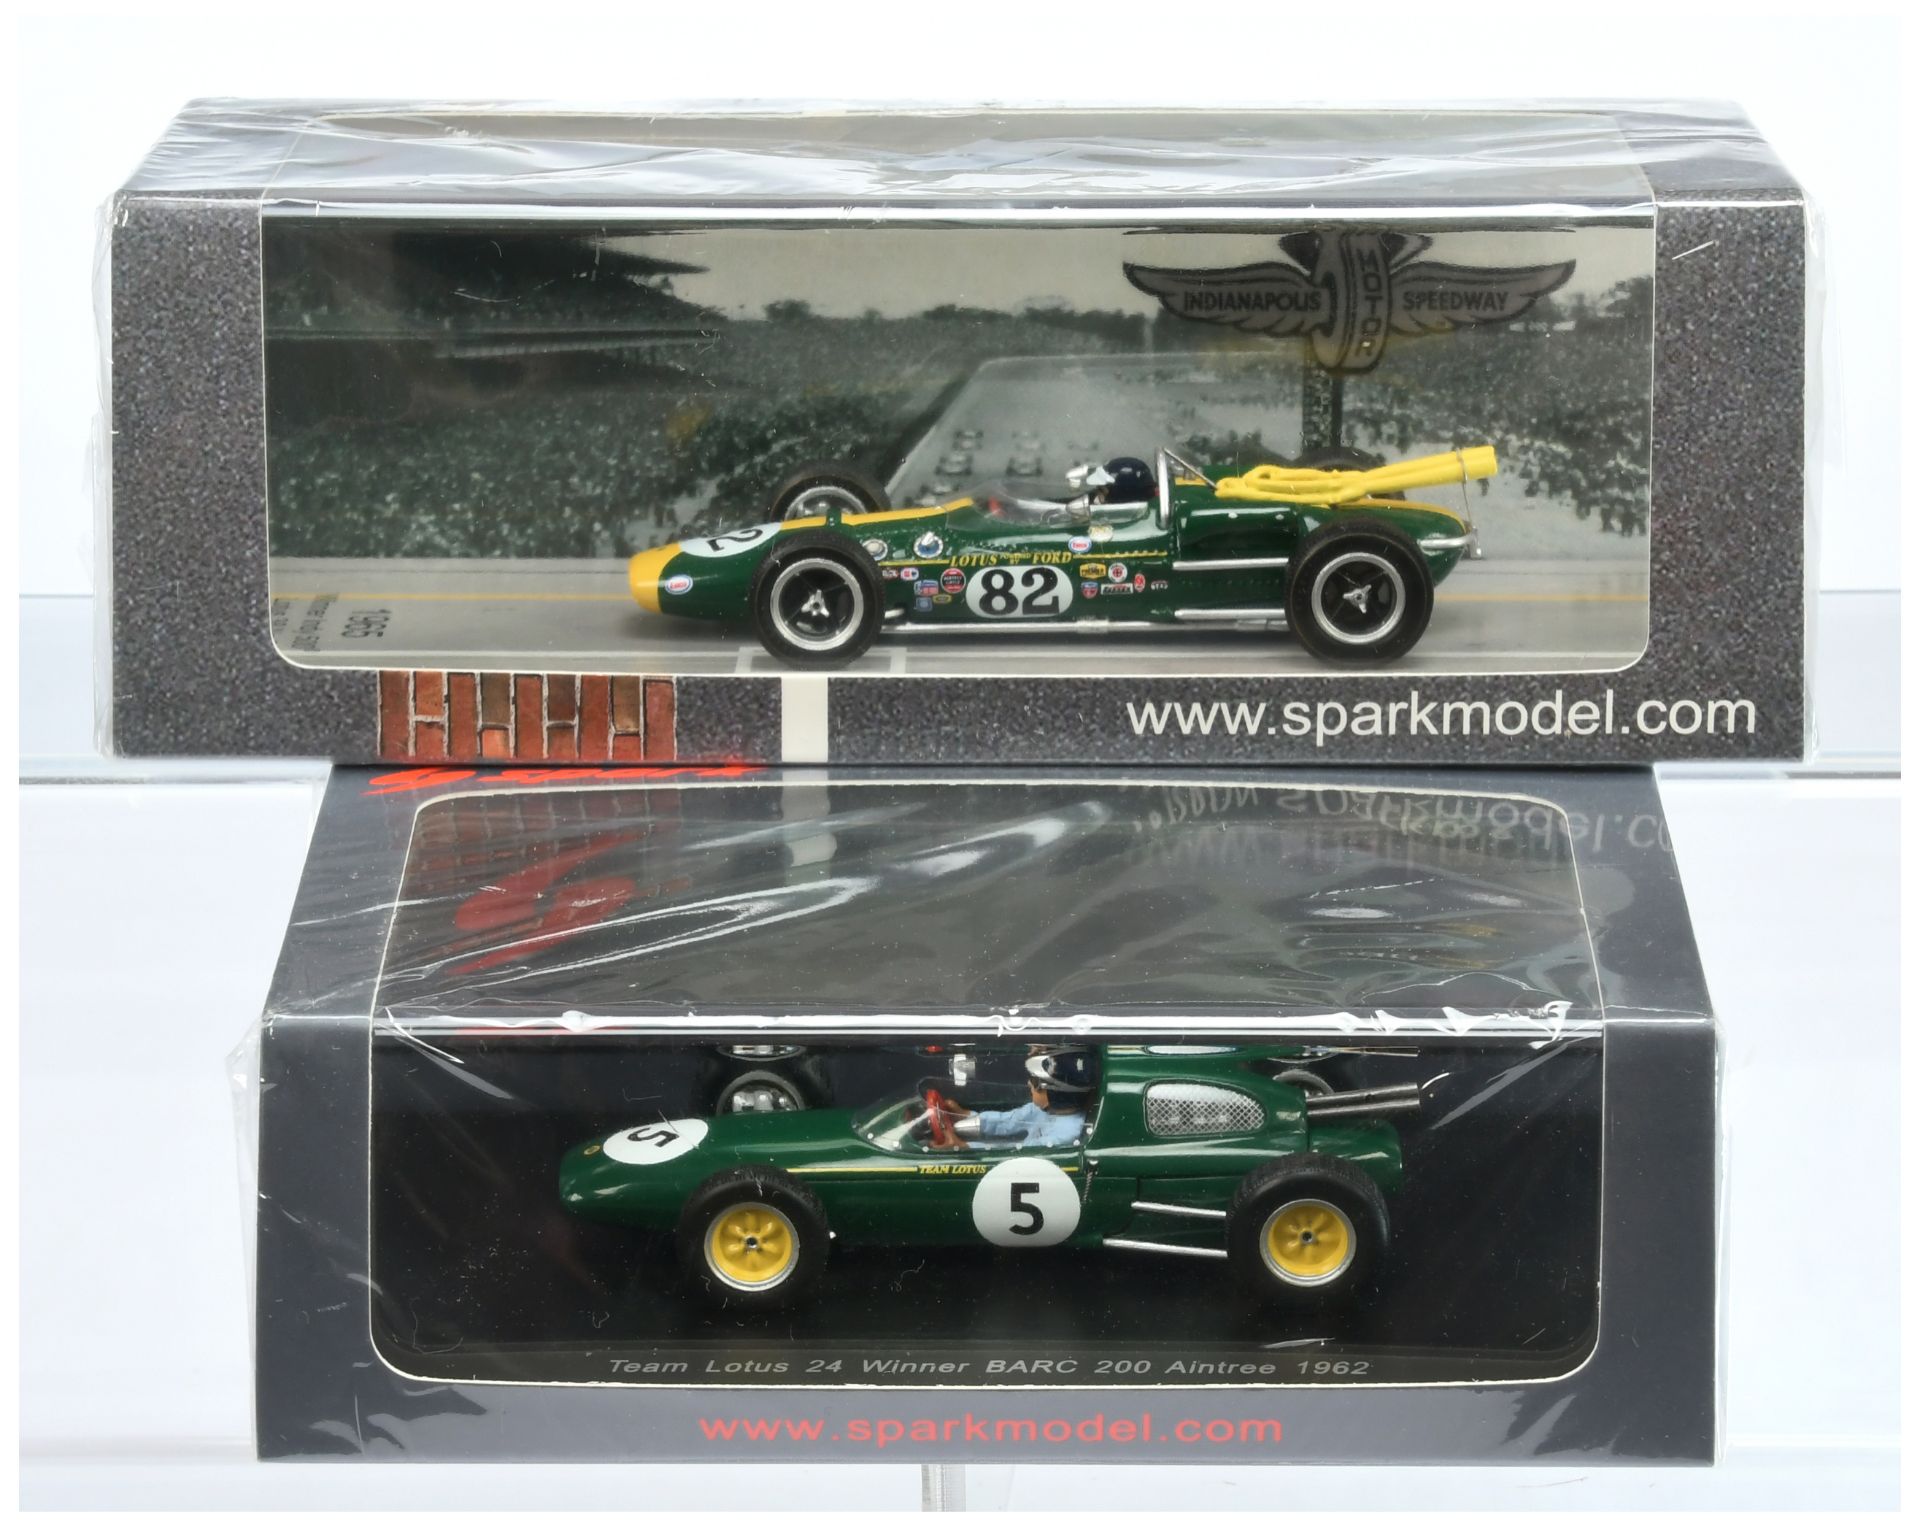 Spark Model (1/43rd) A Pair "Jim Clark" - (1) S2137 - "Team Lotus" 1962 "BARC 200" and (2) 43IN65...